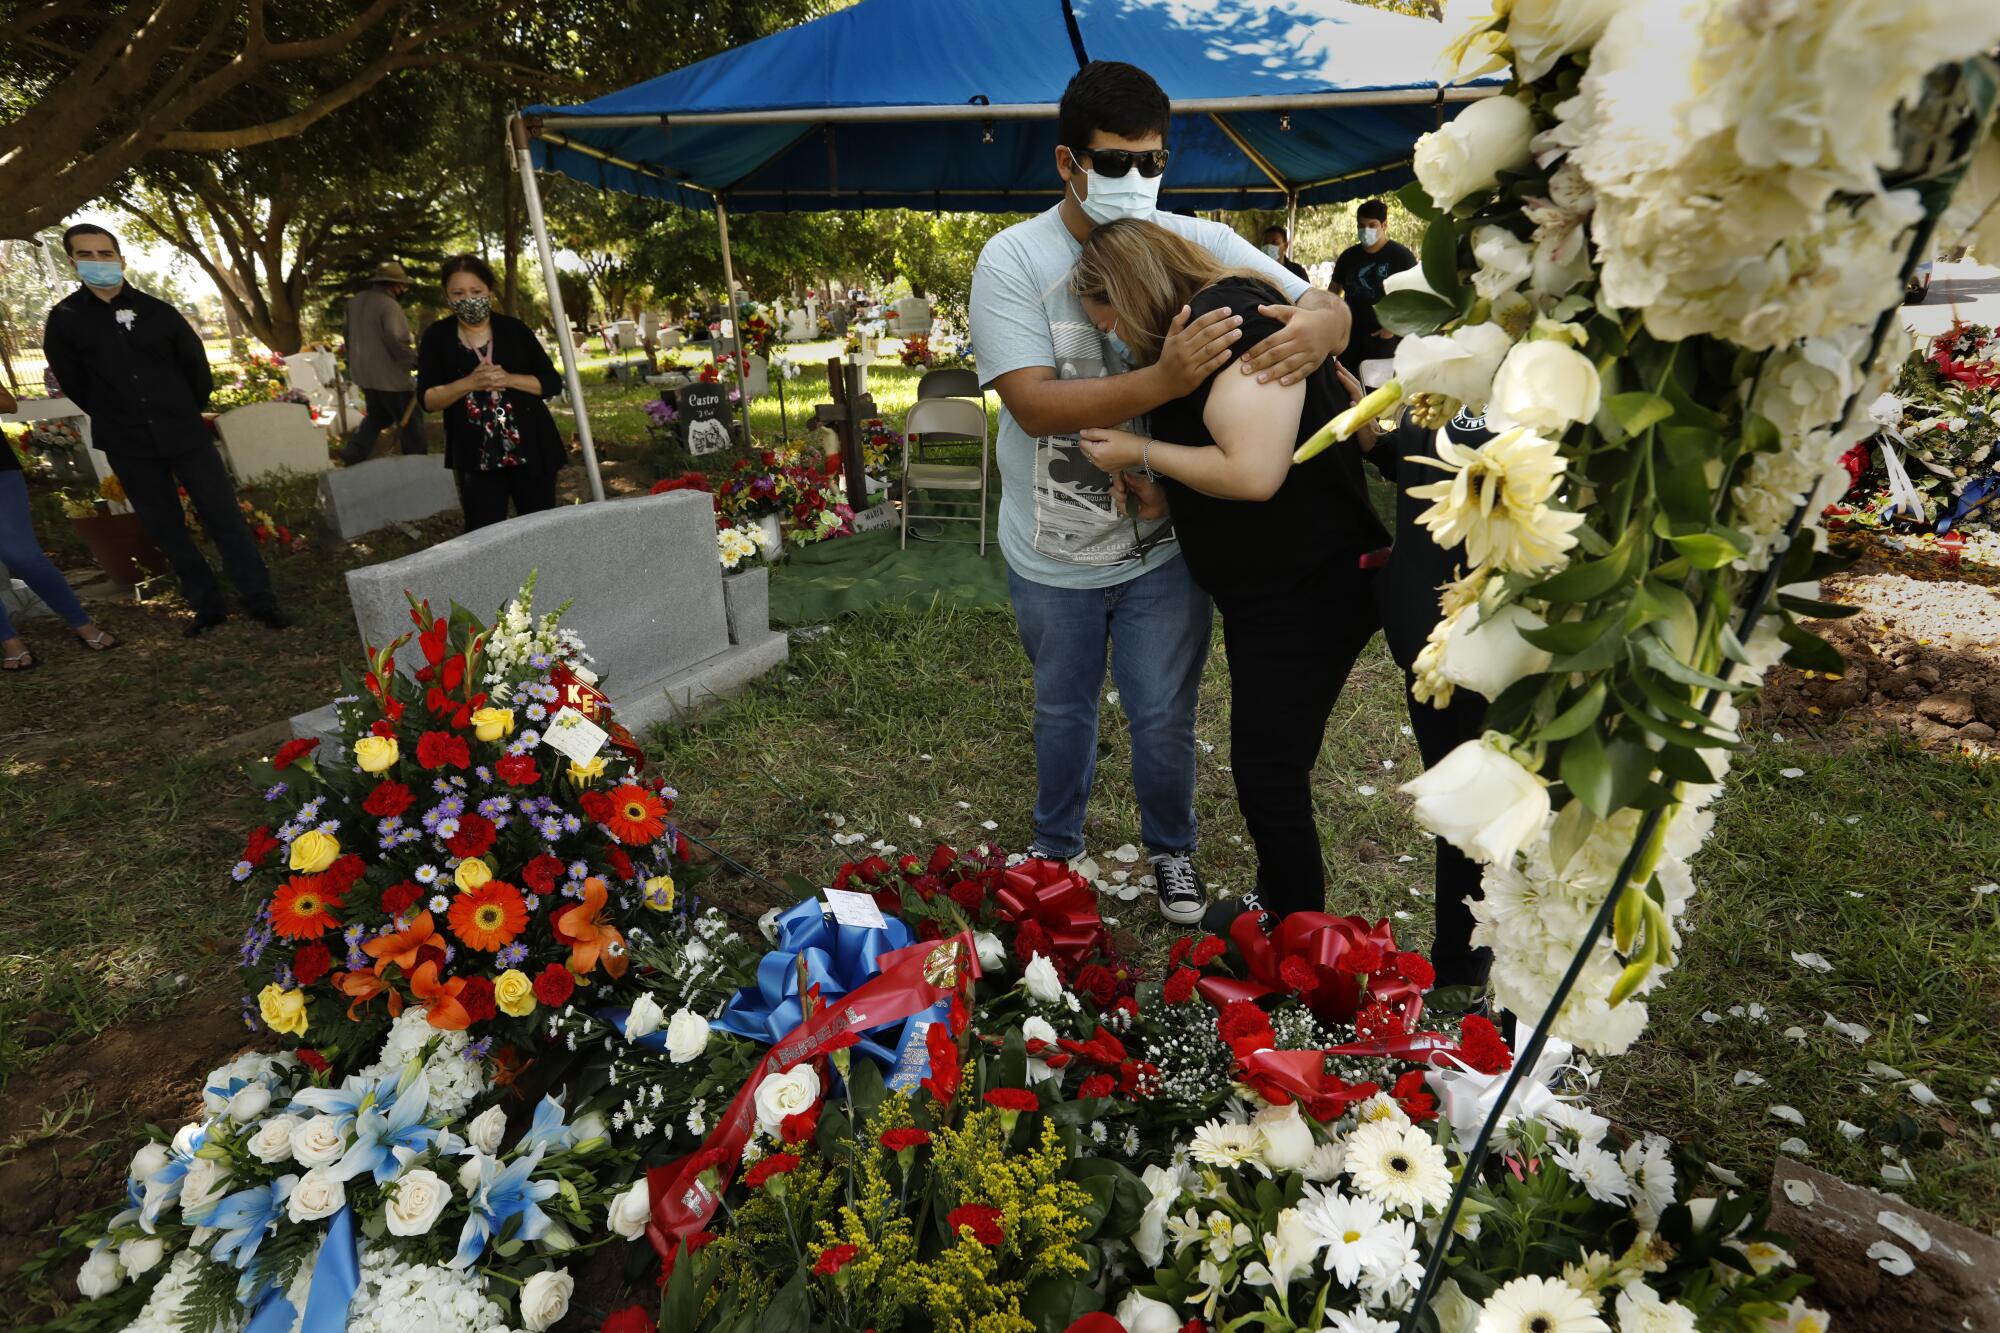 Family members mourn at the gravesite at La Piedad Cemetery in McAllen, Texas.